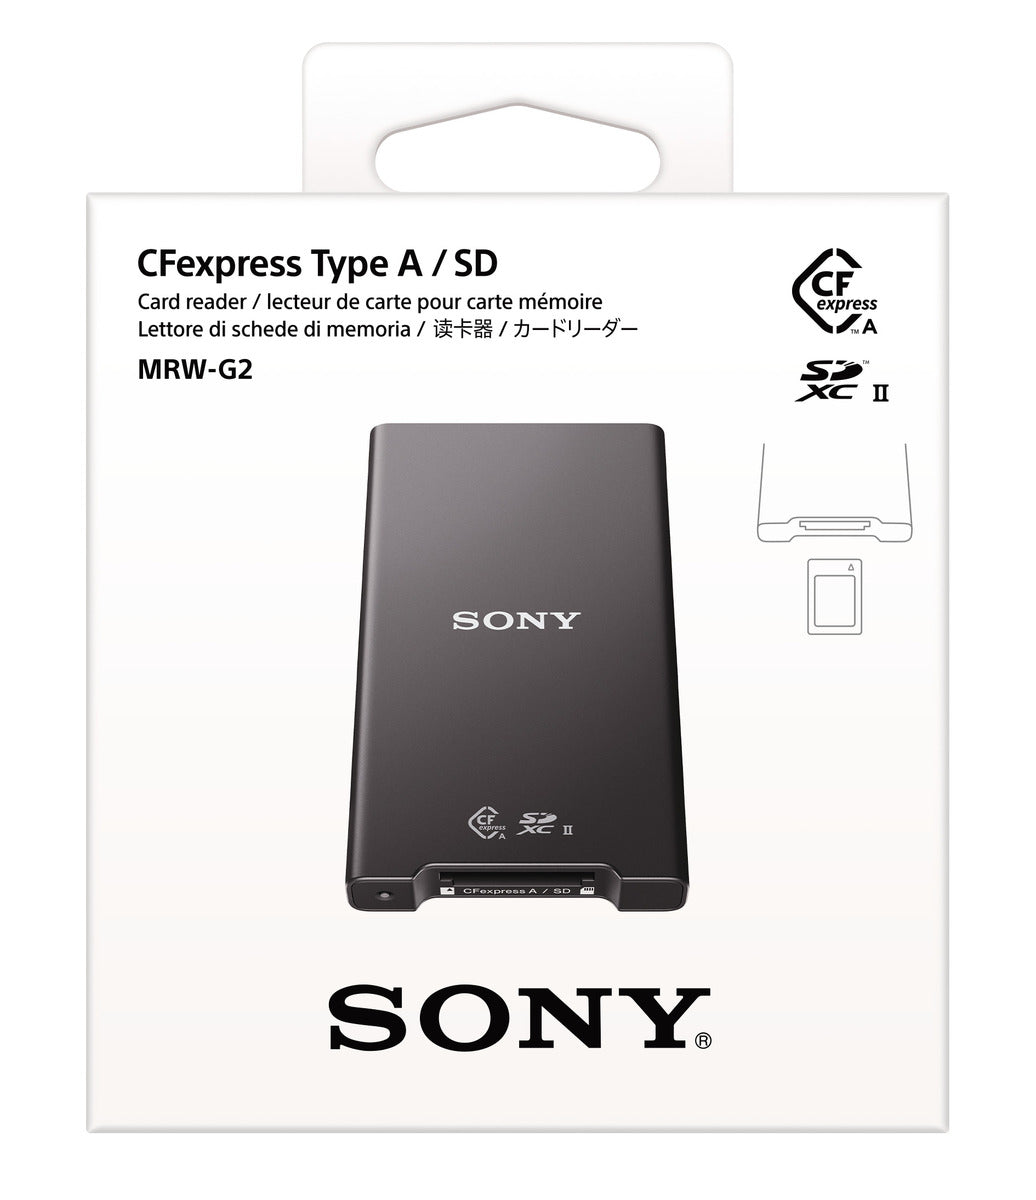 Sony MRW-G2 CFexpress Type A/SD Memory Card Reader - Product Photo 3 - Packaging Shot